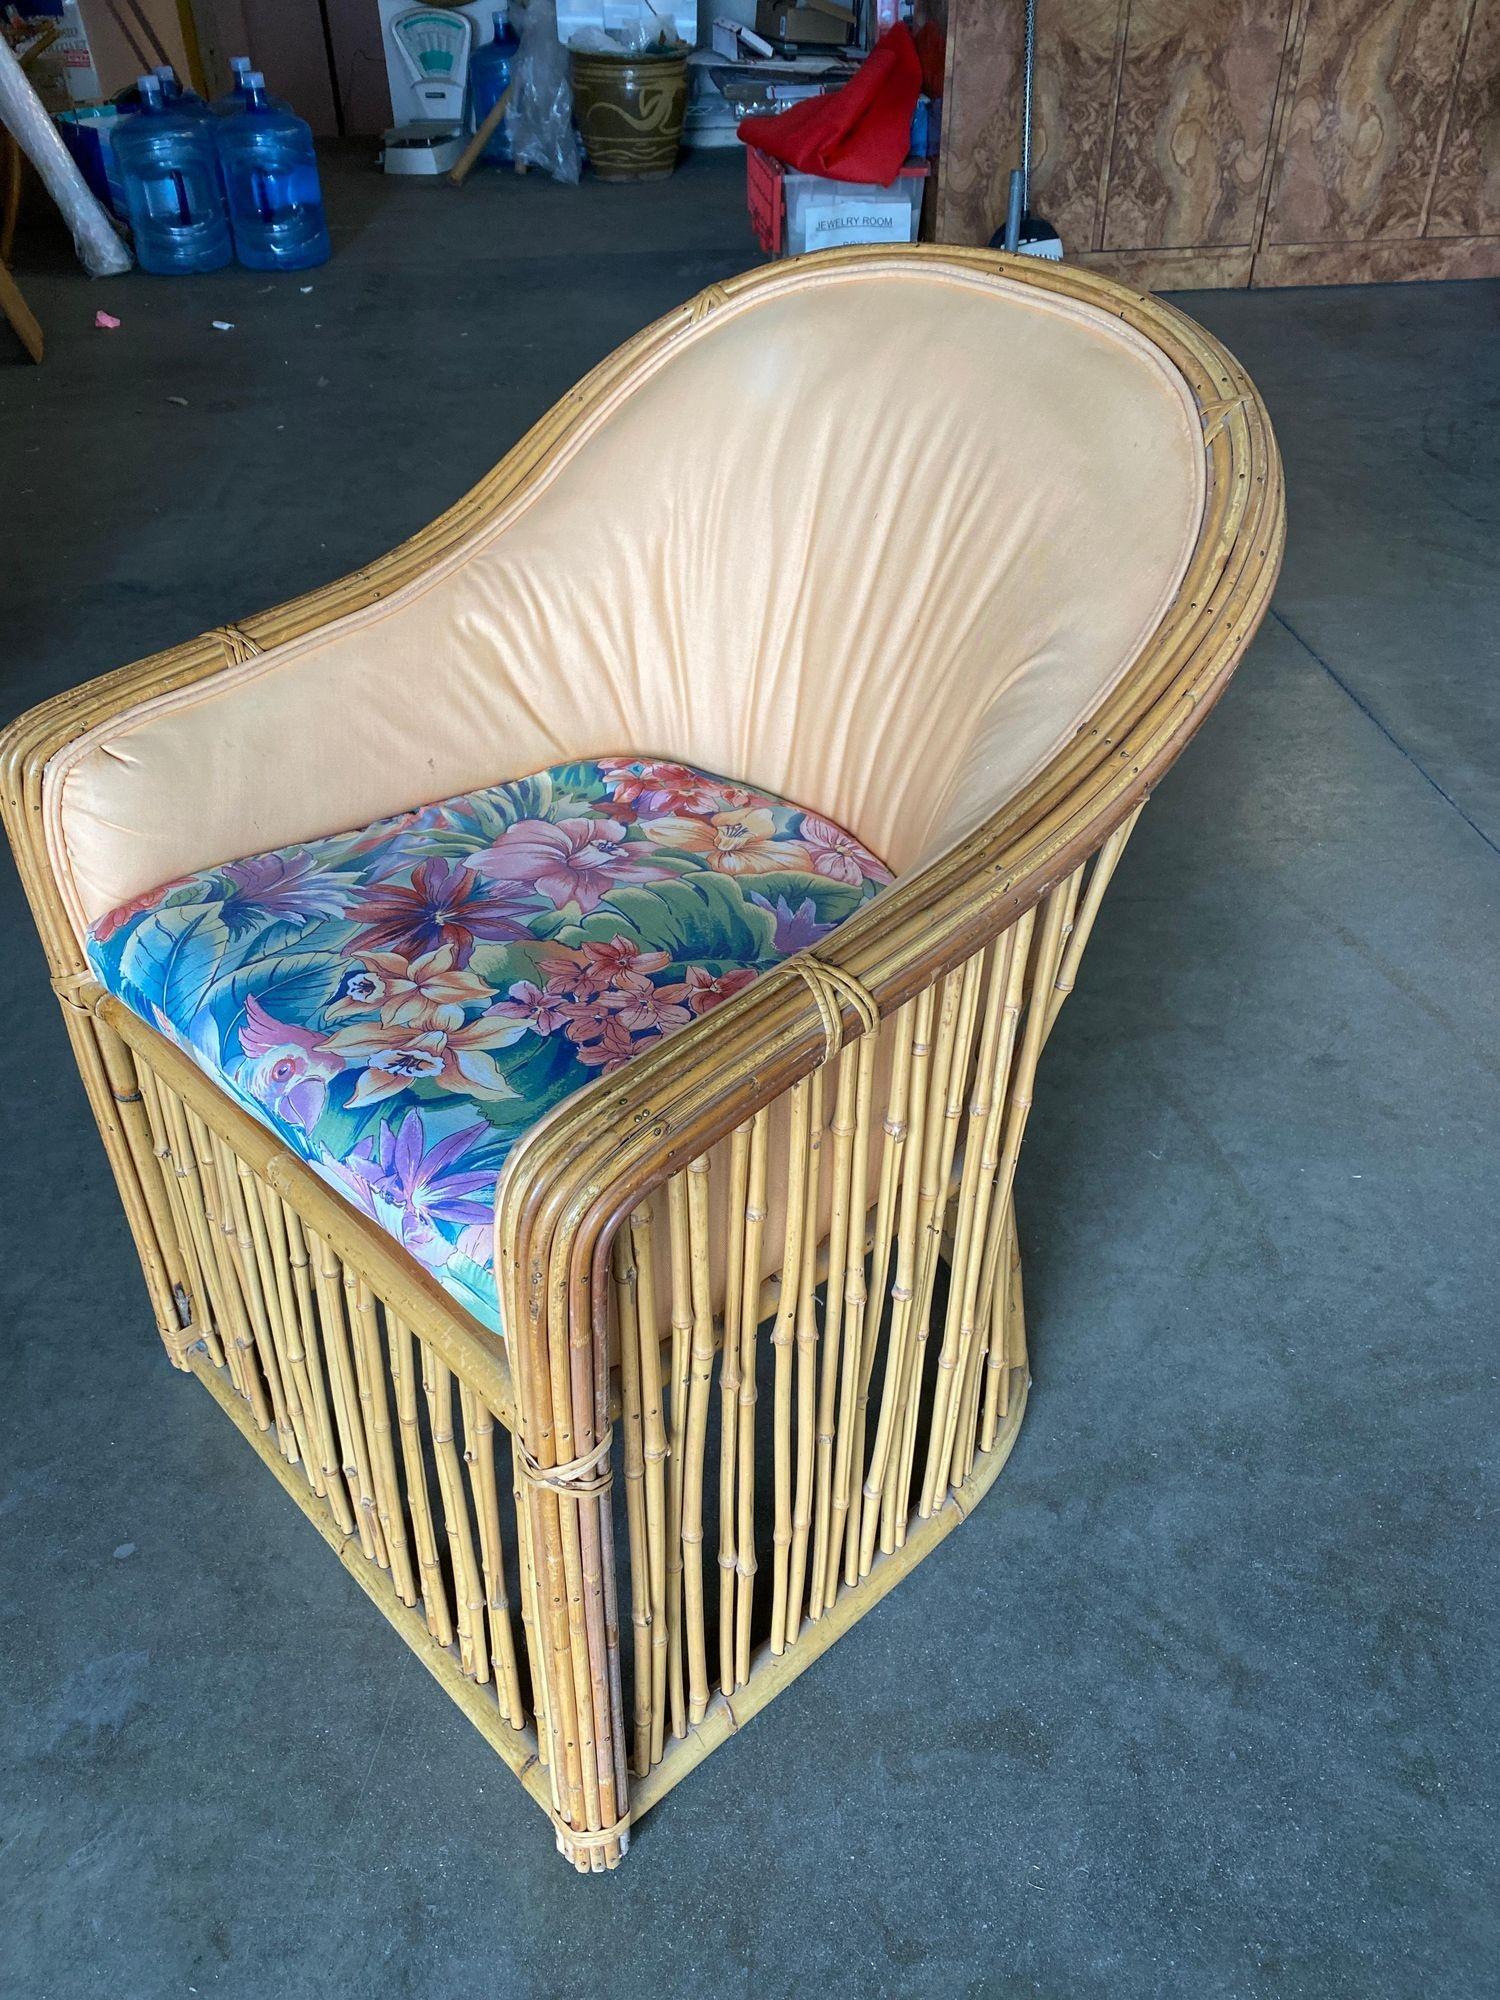 Restored Gabriella Crespi Style Pencil Reed Rattan Armchair, Set of Four In Excellent Condition For Sale In Van Nuys, CA